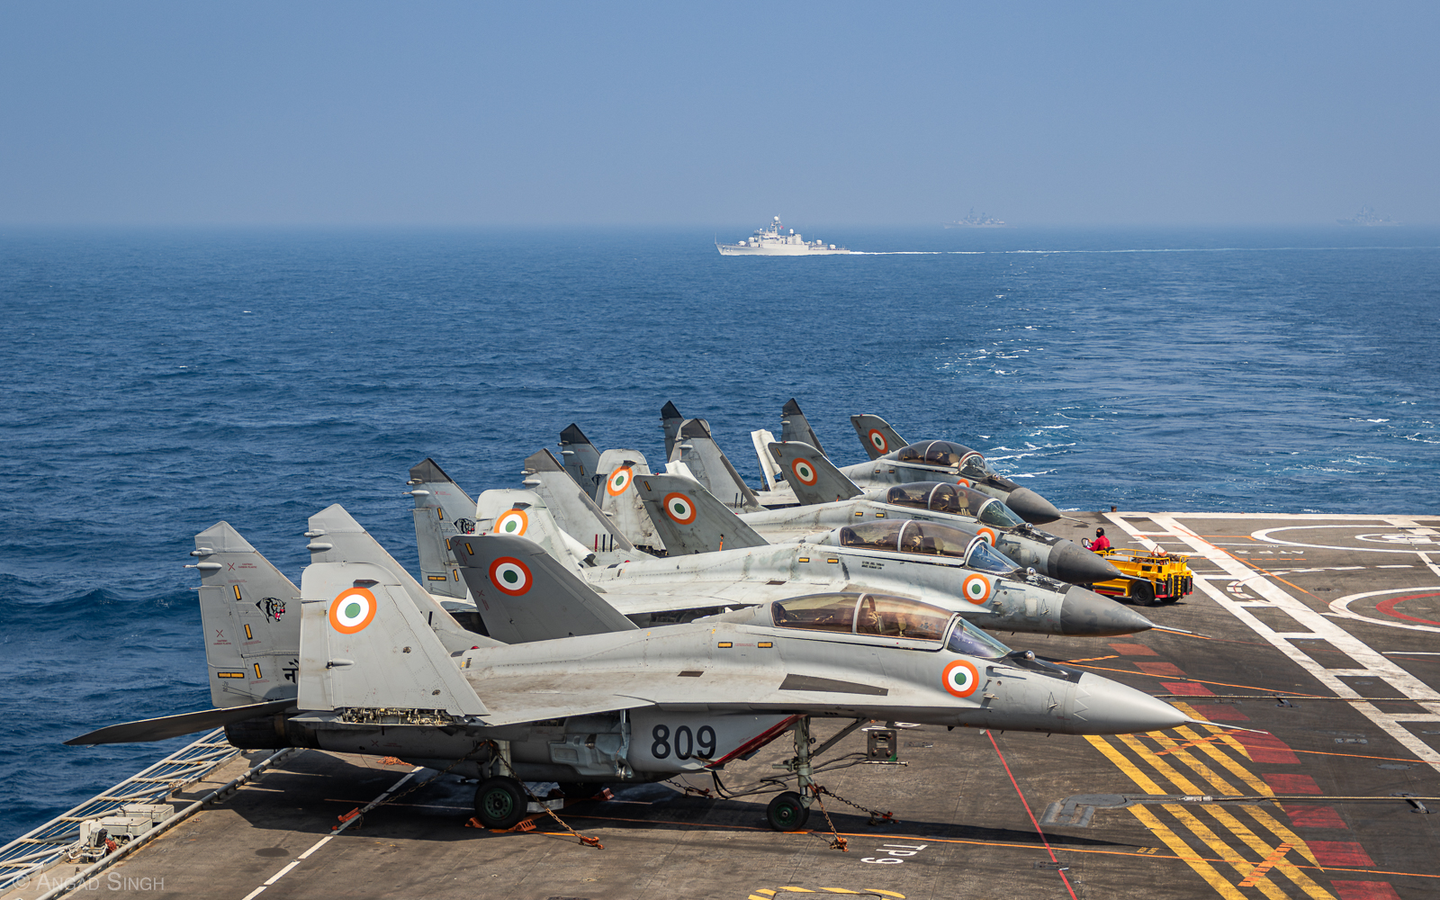 MiG-29Ks parked on the flight deck of INS <em>Vikramaditya</em> as exercise warships steam away toward Visakhapatnam after the conclusion of the sea phase. The nearest vessel is a Vietnam People’s Navy <em>Pohang</em> class corvette. <em>Angad Singh</em>